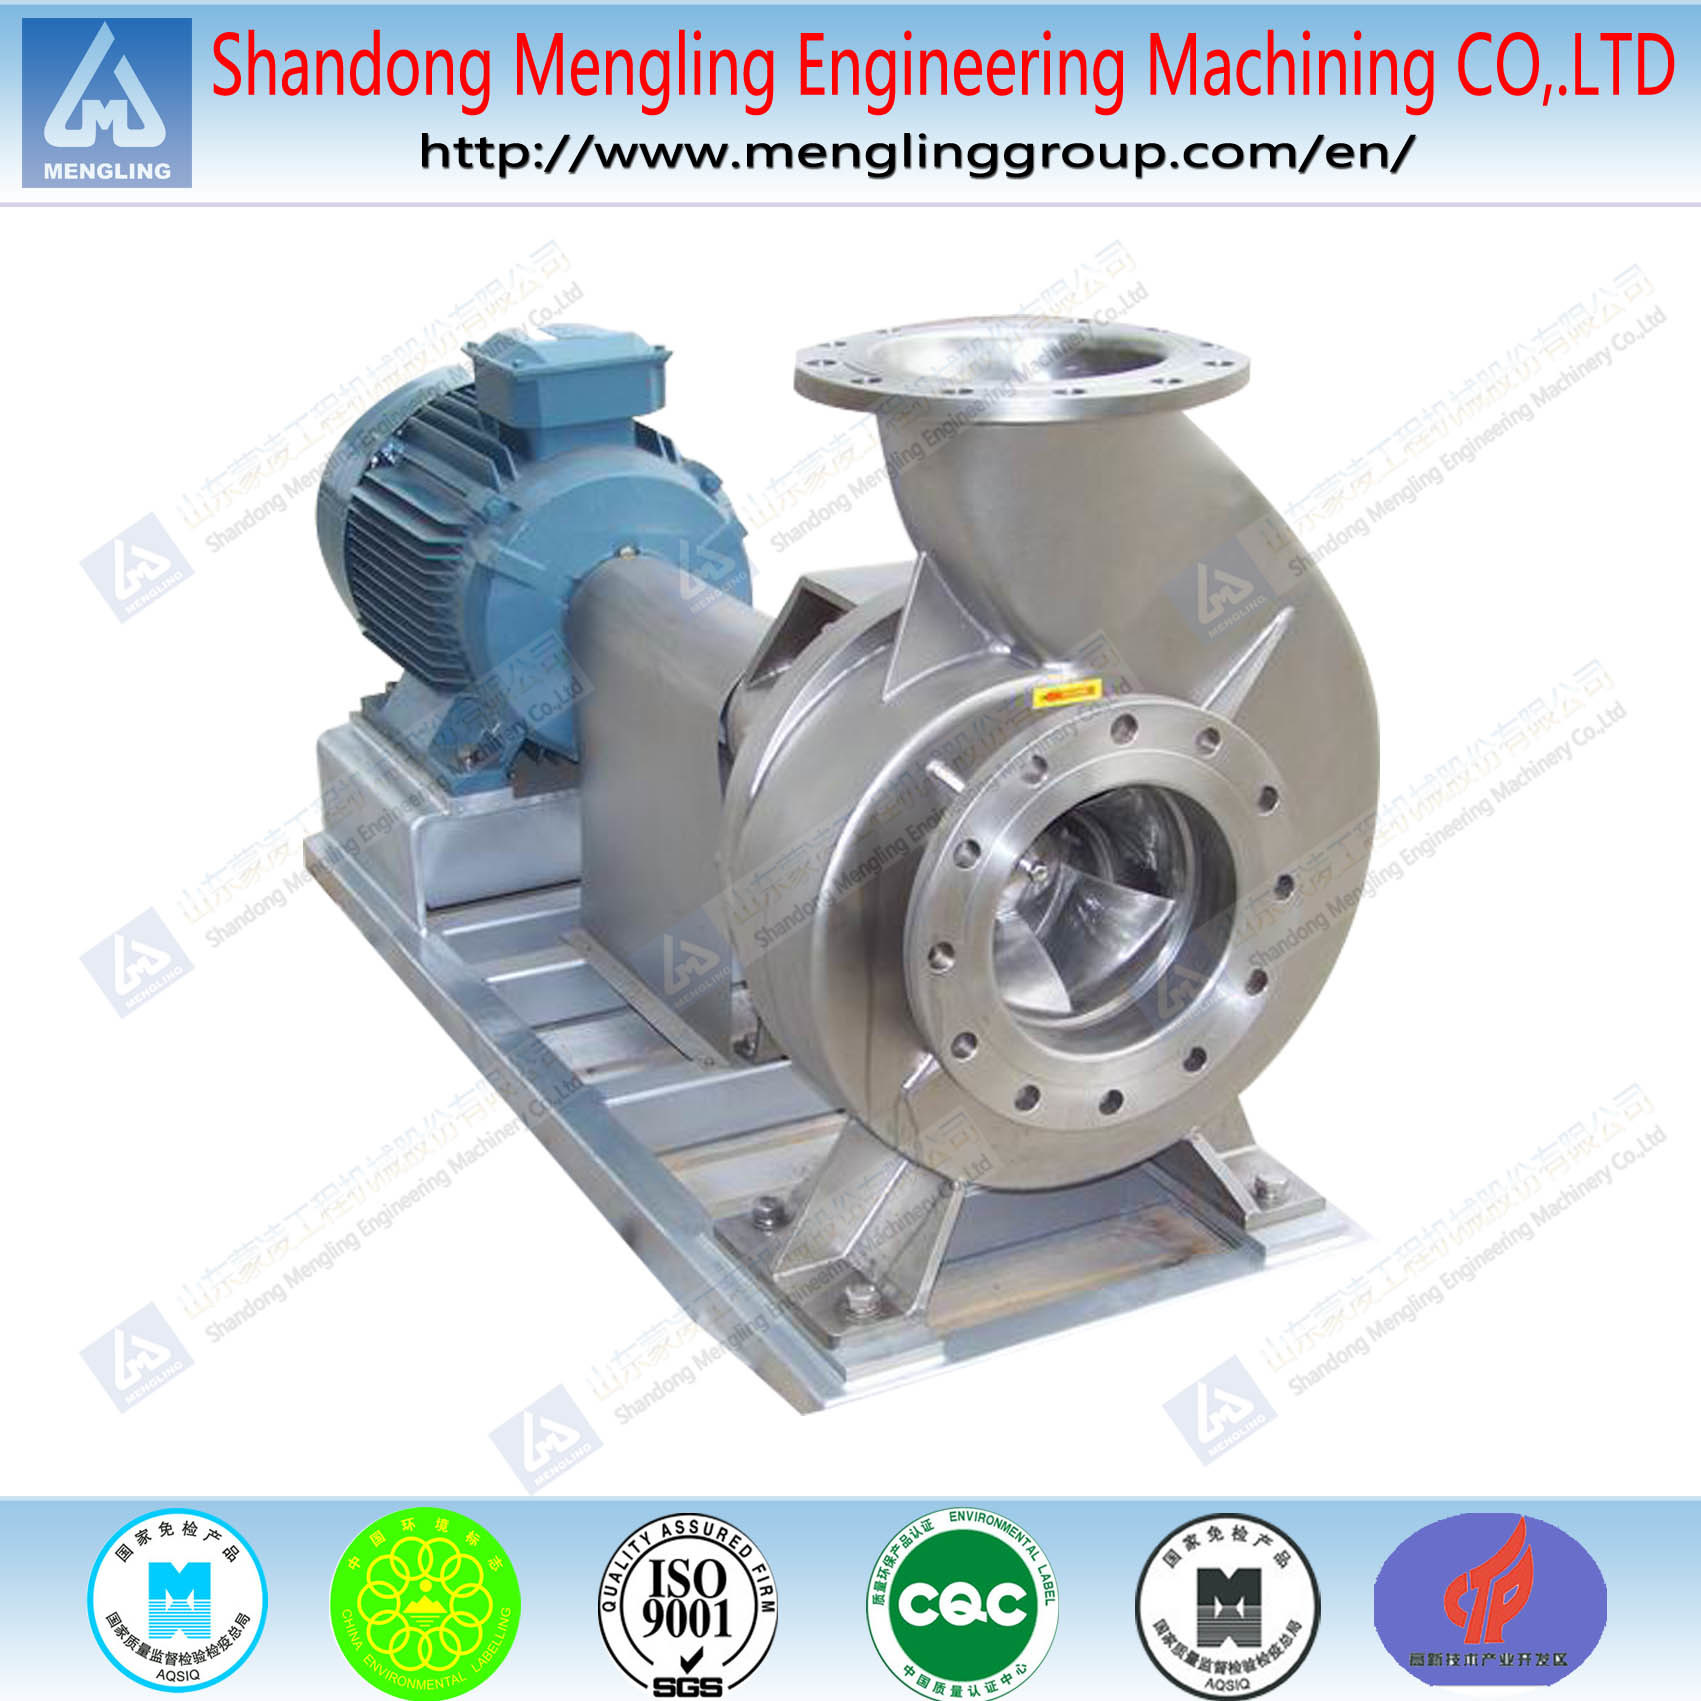 Iron Casting Pump Parts for Centrifugal Pumps